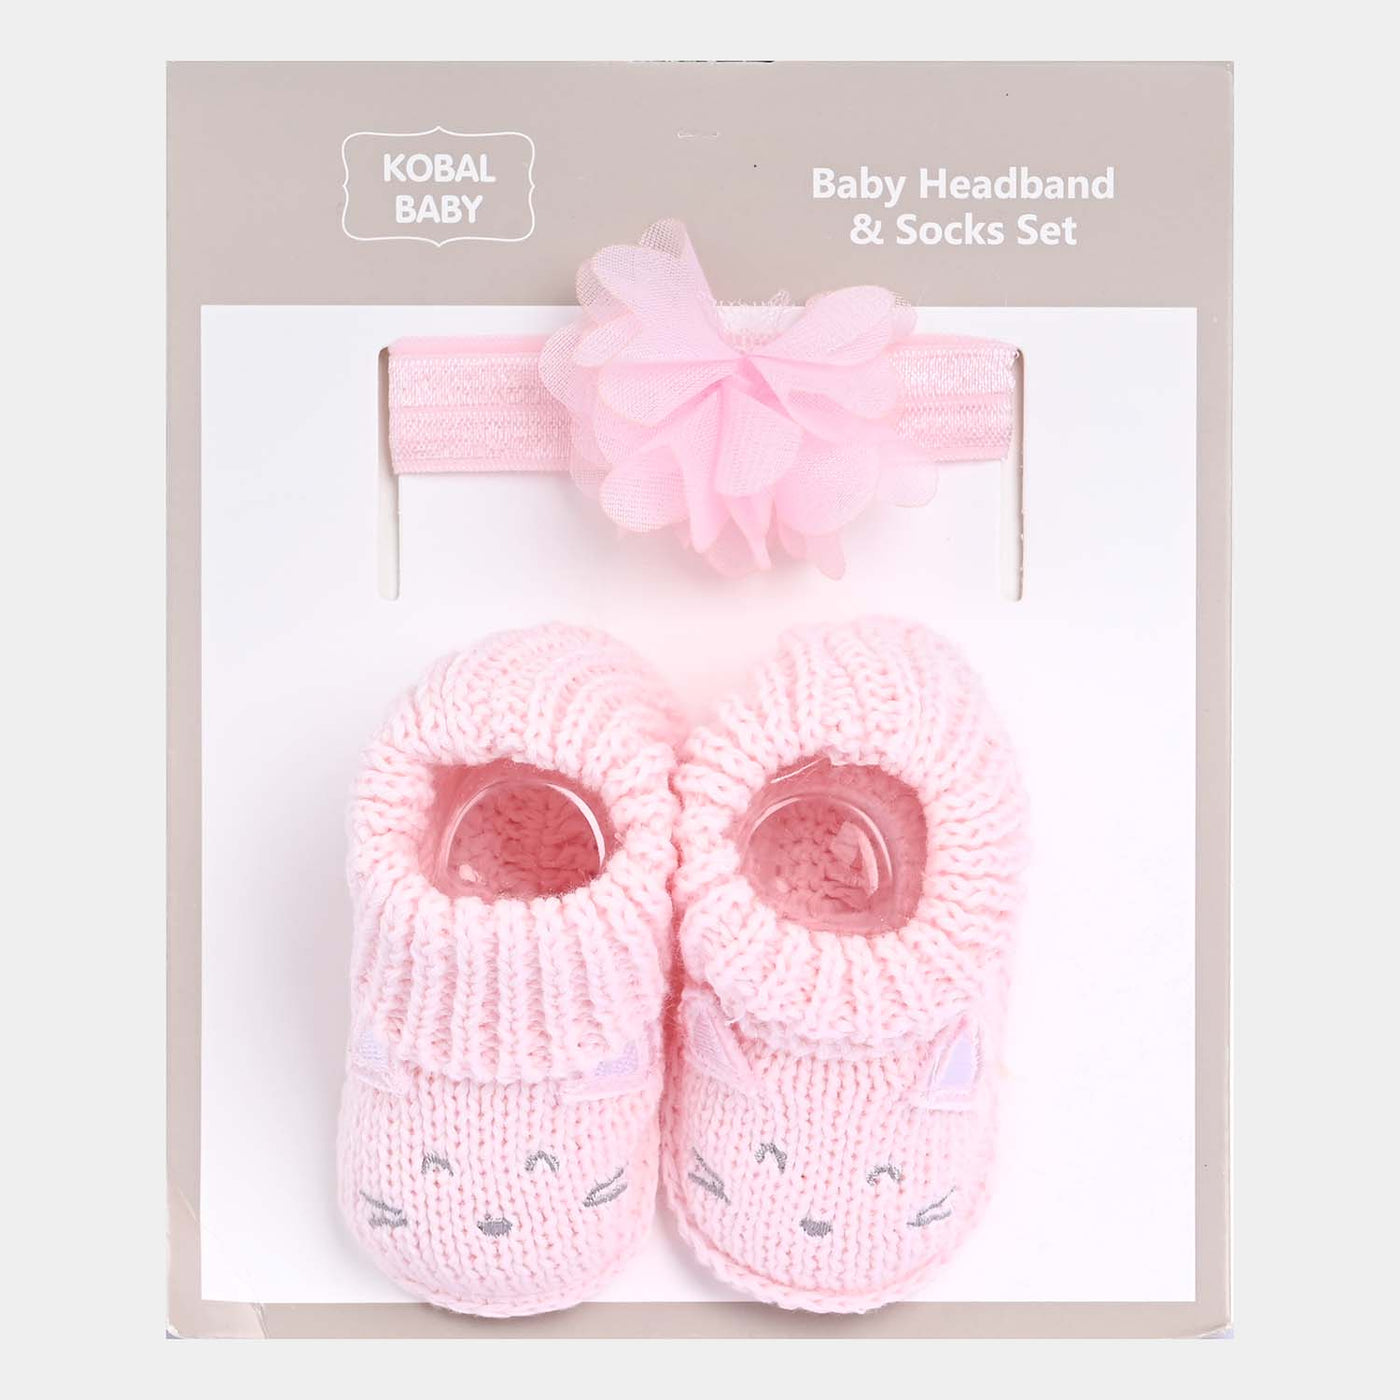 Baby Shoes With Head Band 0-6M-Light Pink